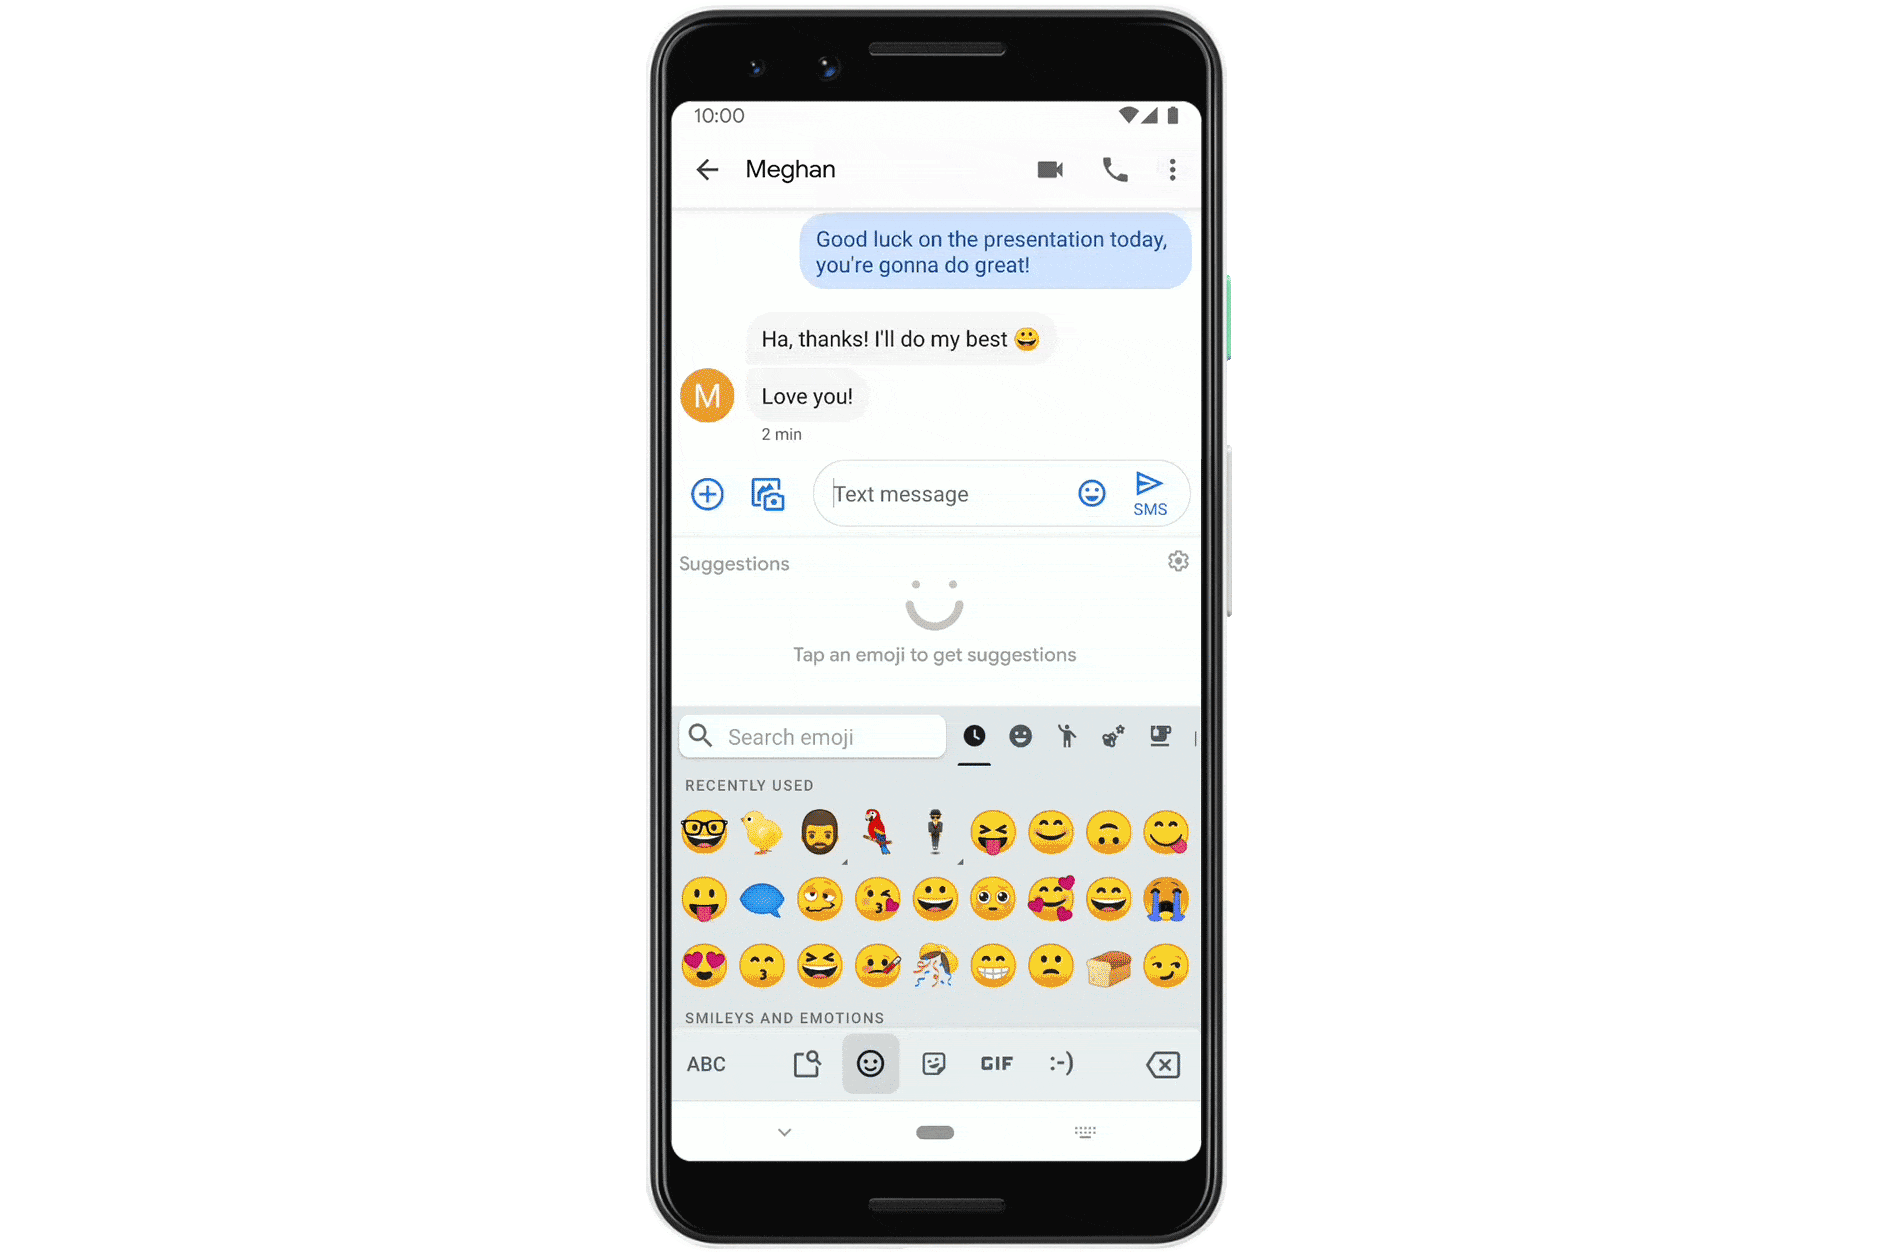 Tap on an existing smiley emoji, and Emoji Kitchen will suggest a relevant sticker mashup.